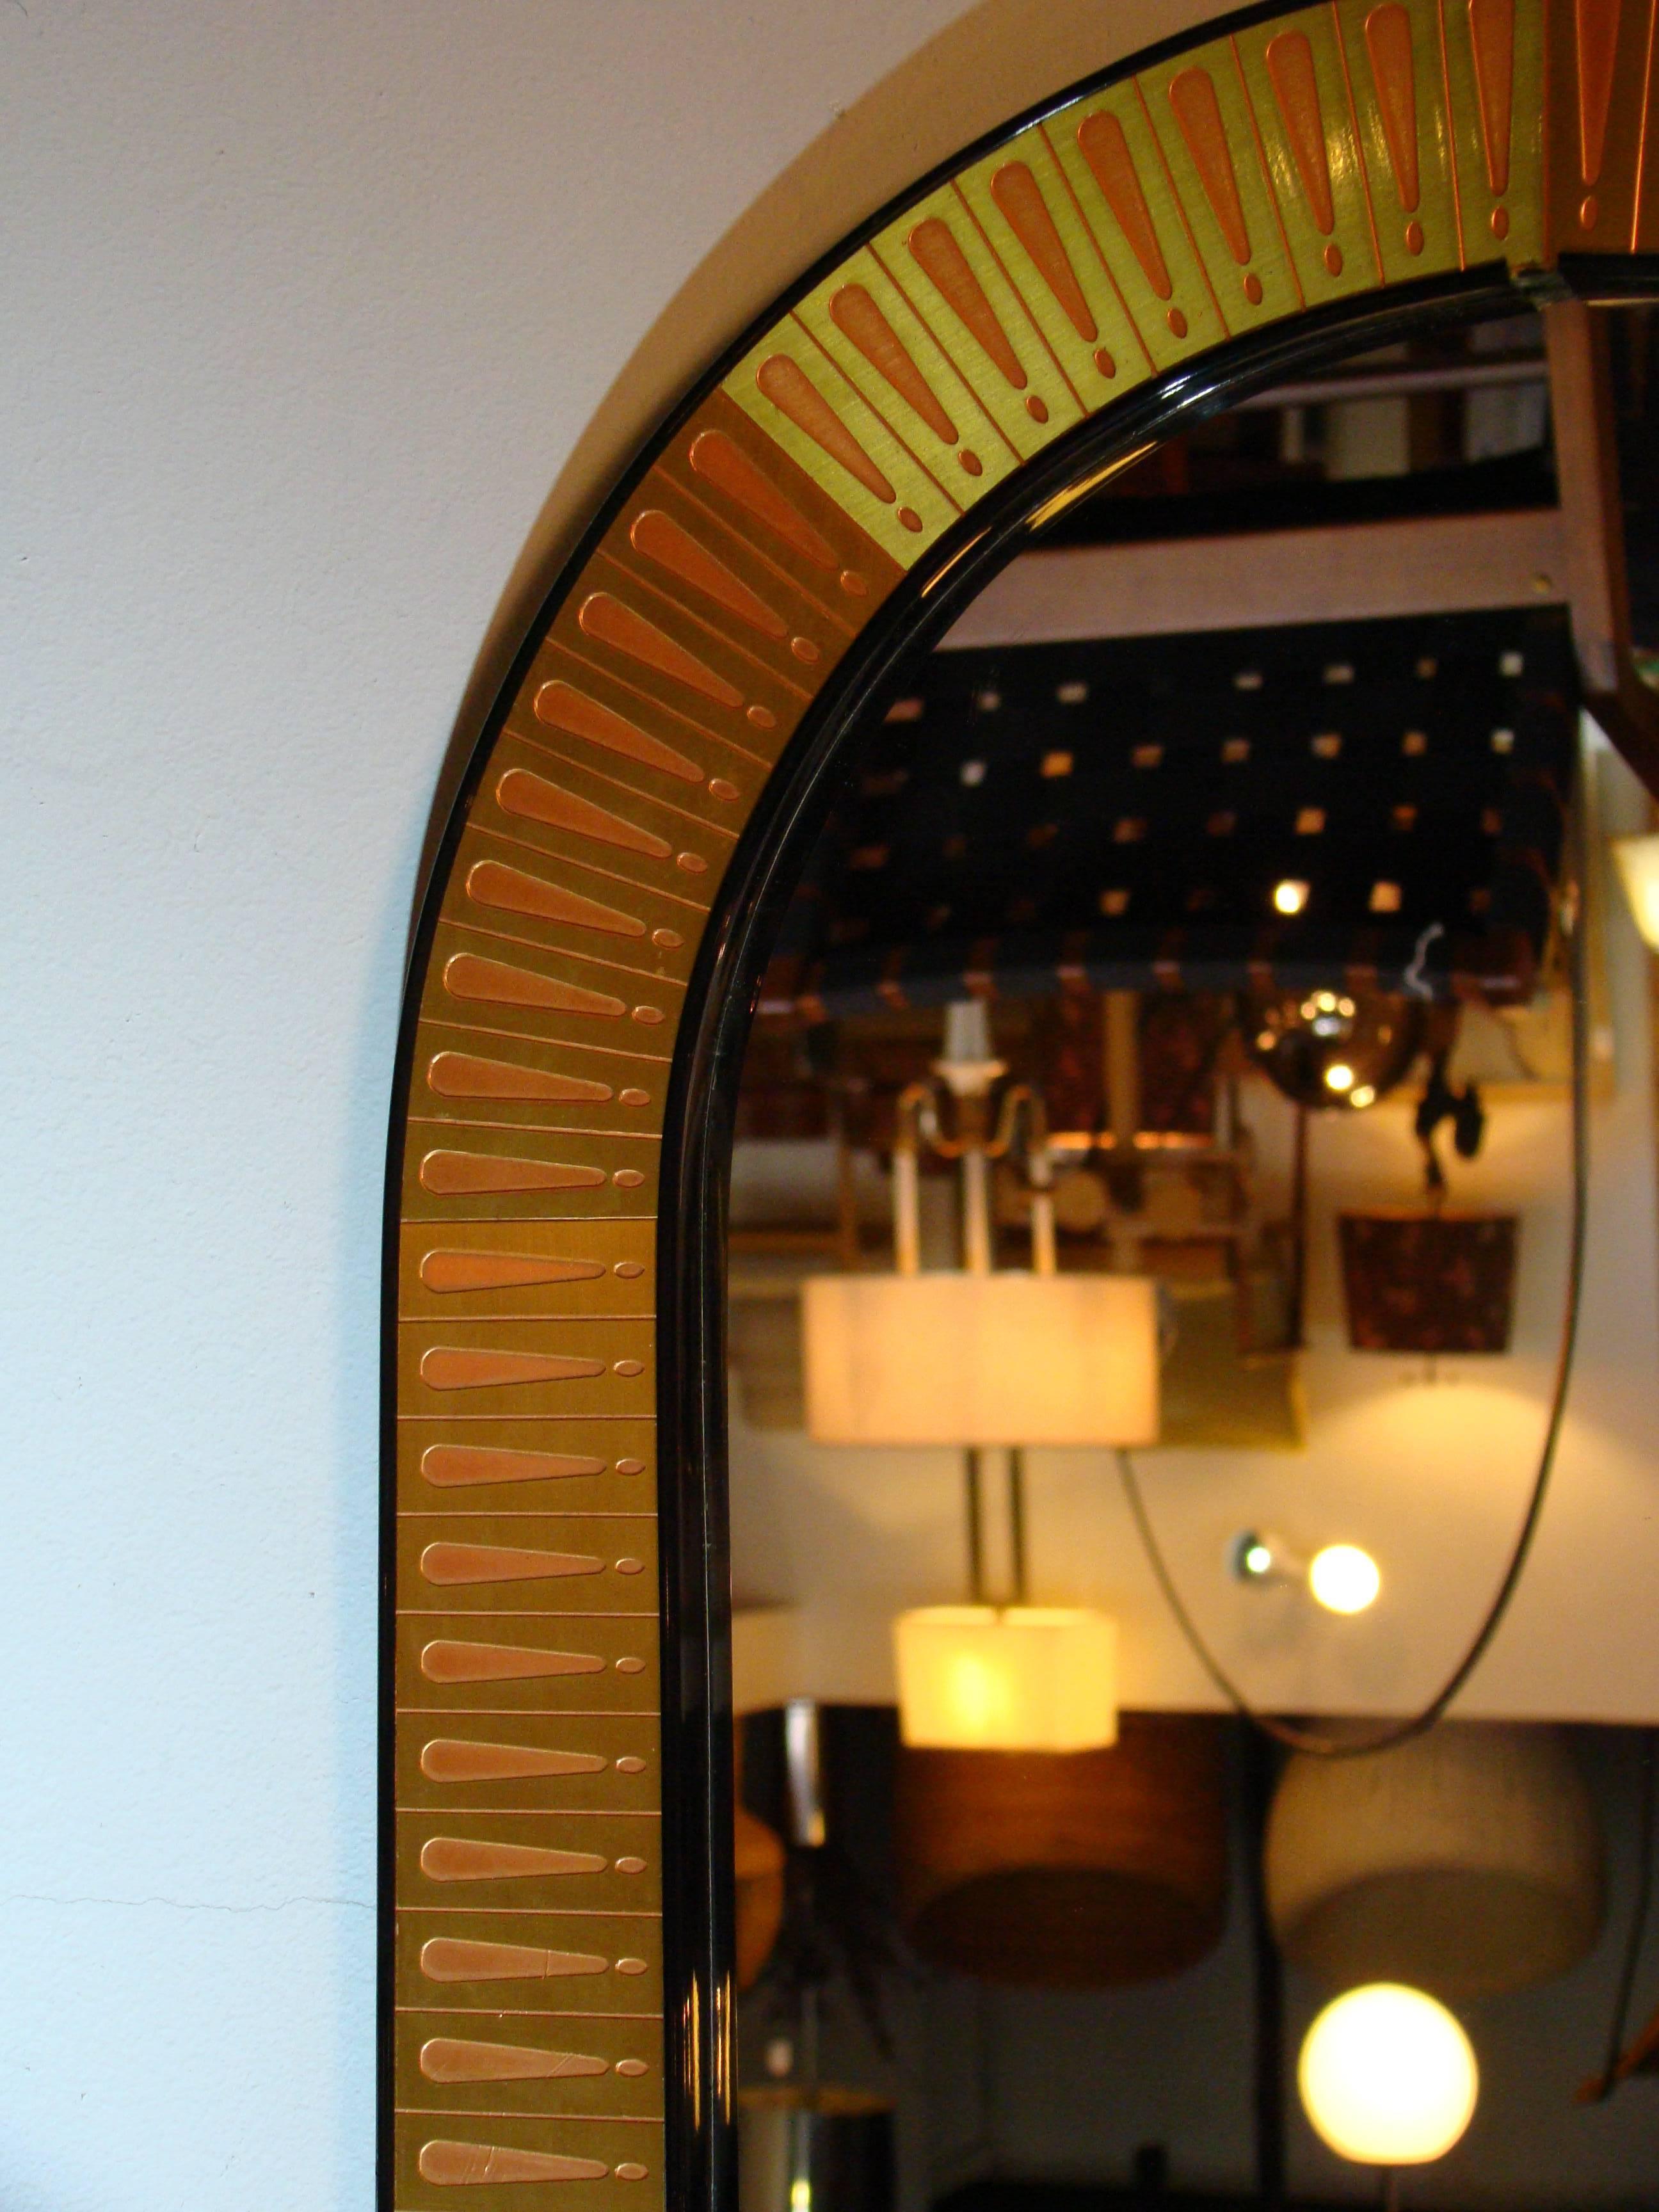 Brass and copper wall mirror by artist Bijan. Bijan is well-known for his 3D sculptures in bronze, copper and brass. This mirror, as all his pieces are, is individually handcrafted. A beautiful and unique mirror that will make a statement in any